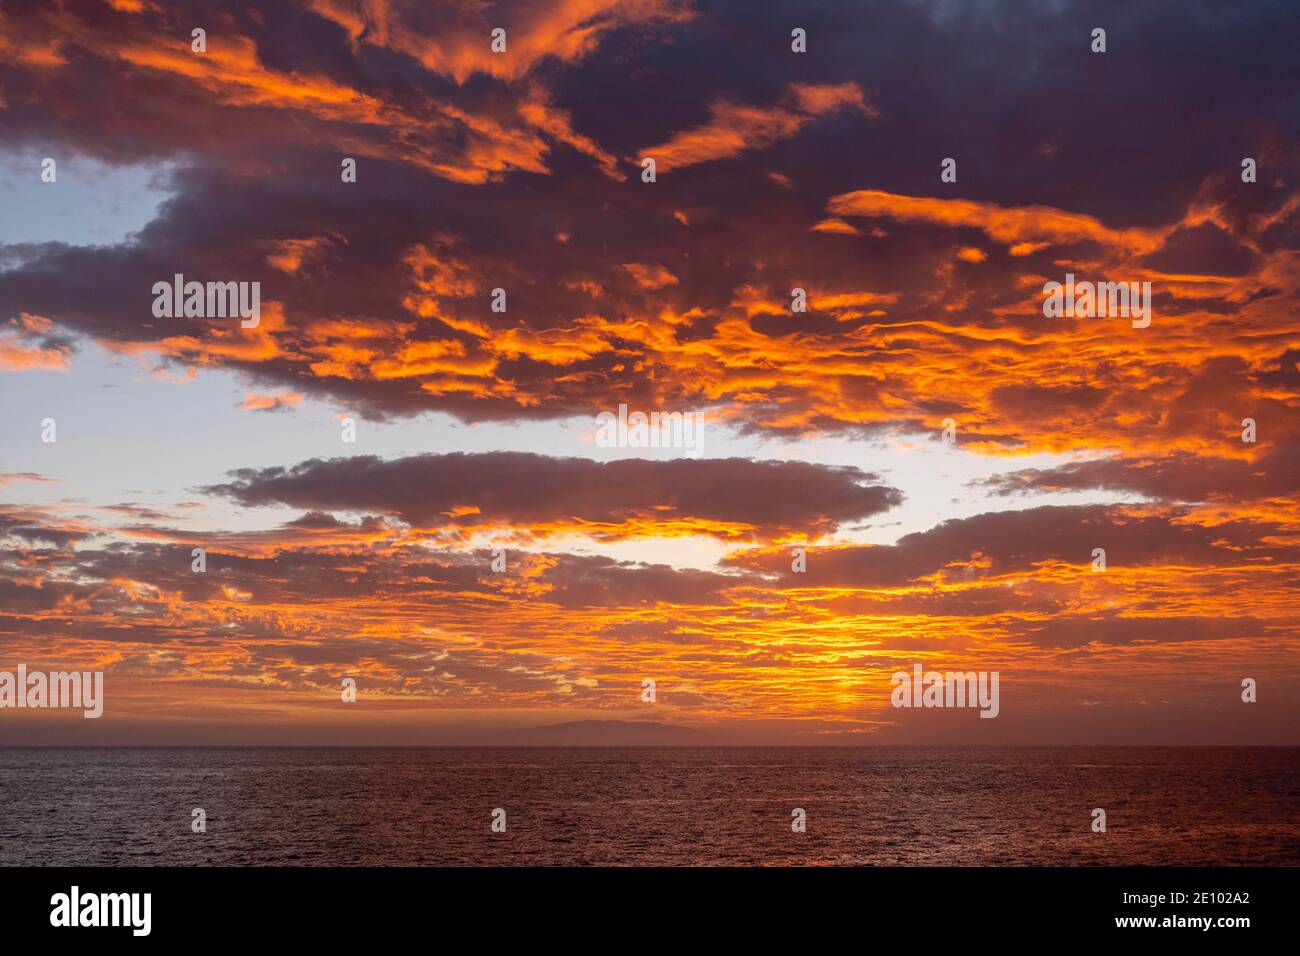 Dramatic cloudy sky, evening mood at the sea, in the back the island El Hierro, Valle Gran Rey, La Gomera, Canary Islands, Spain, Europe Stock Photo